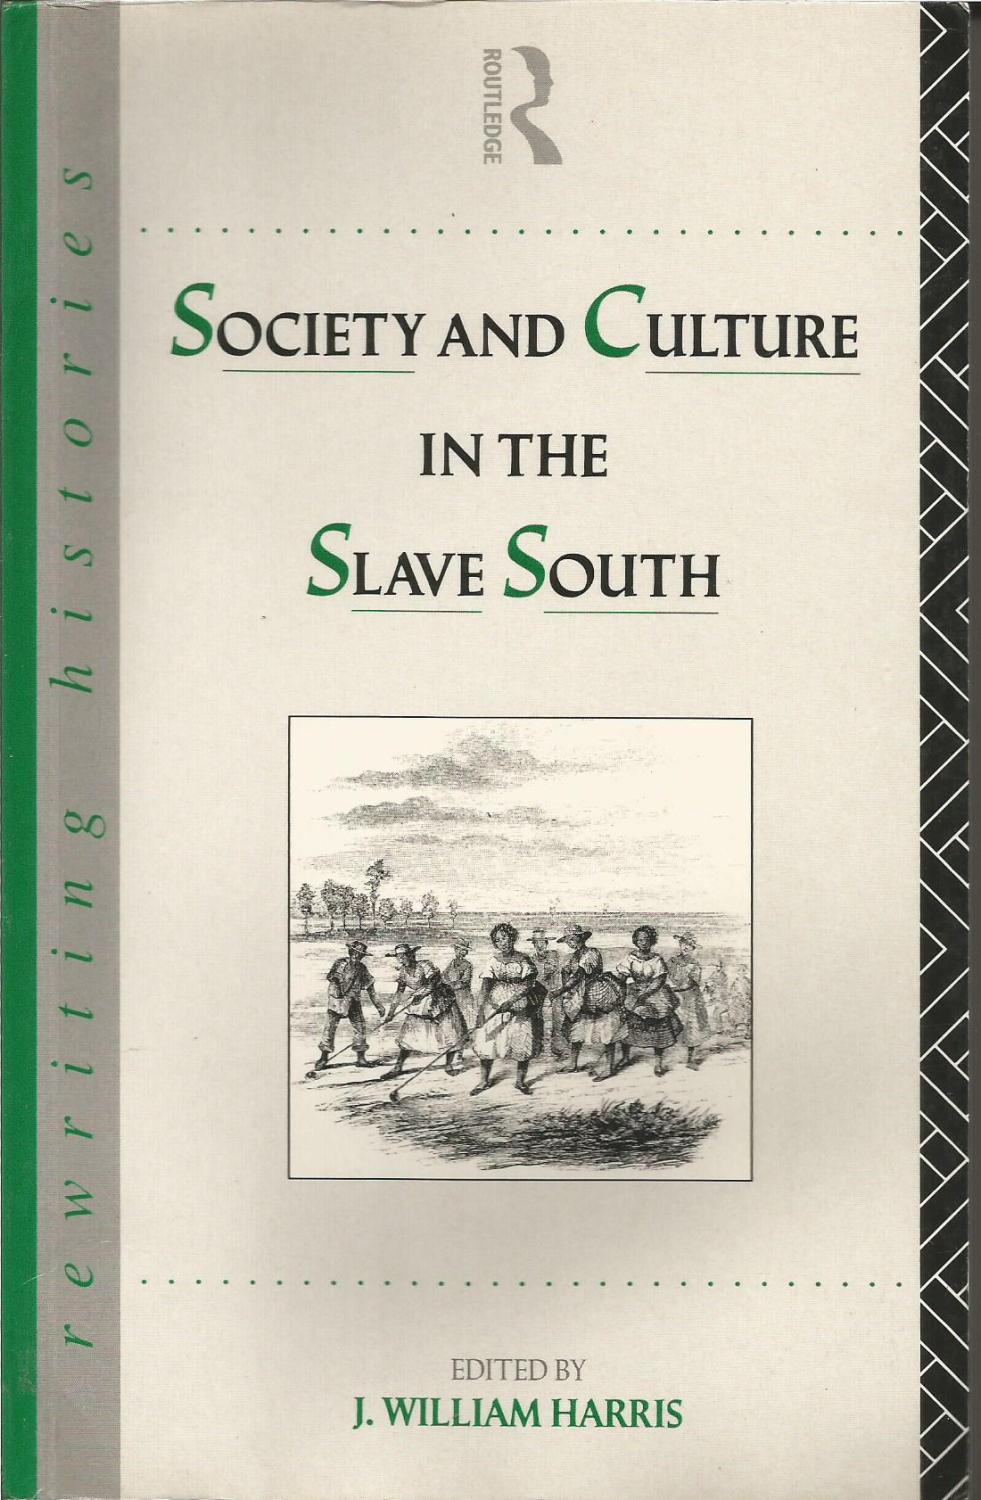 Society and Culture in the Slave South (Rewriting History Series) - Harris, William J.: Editor